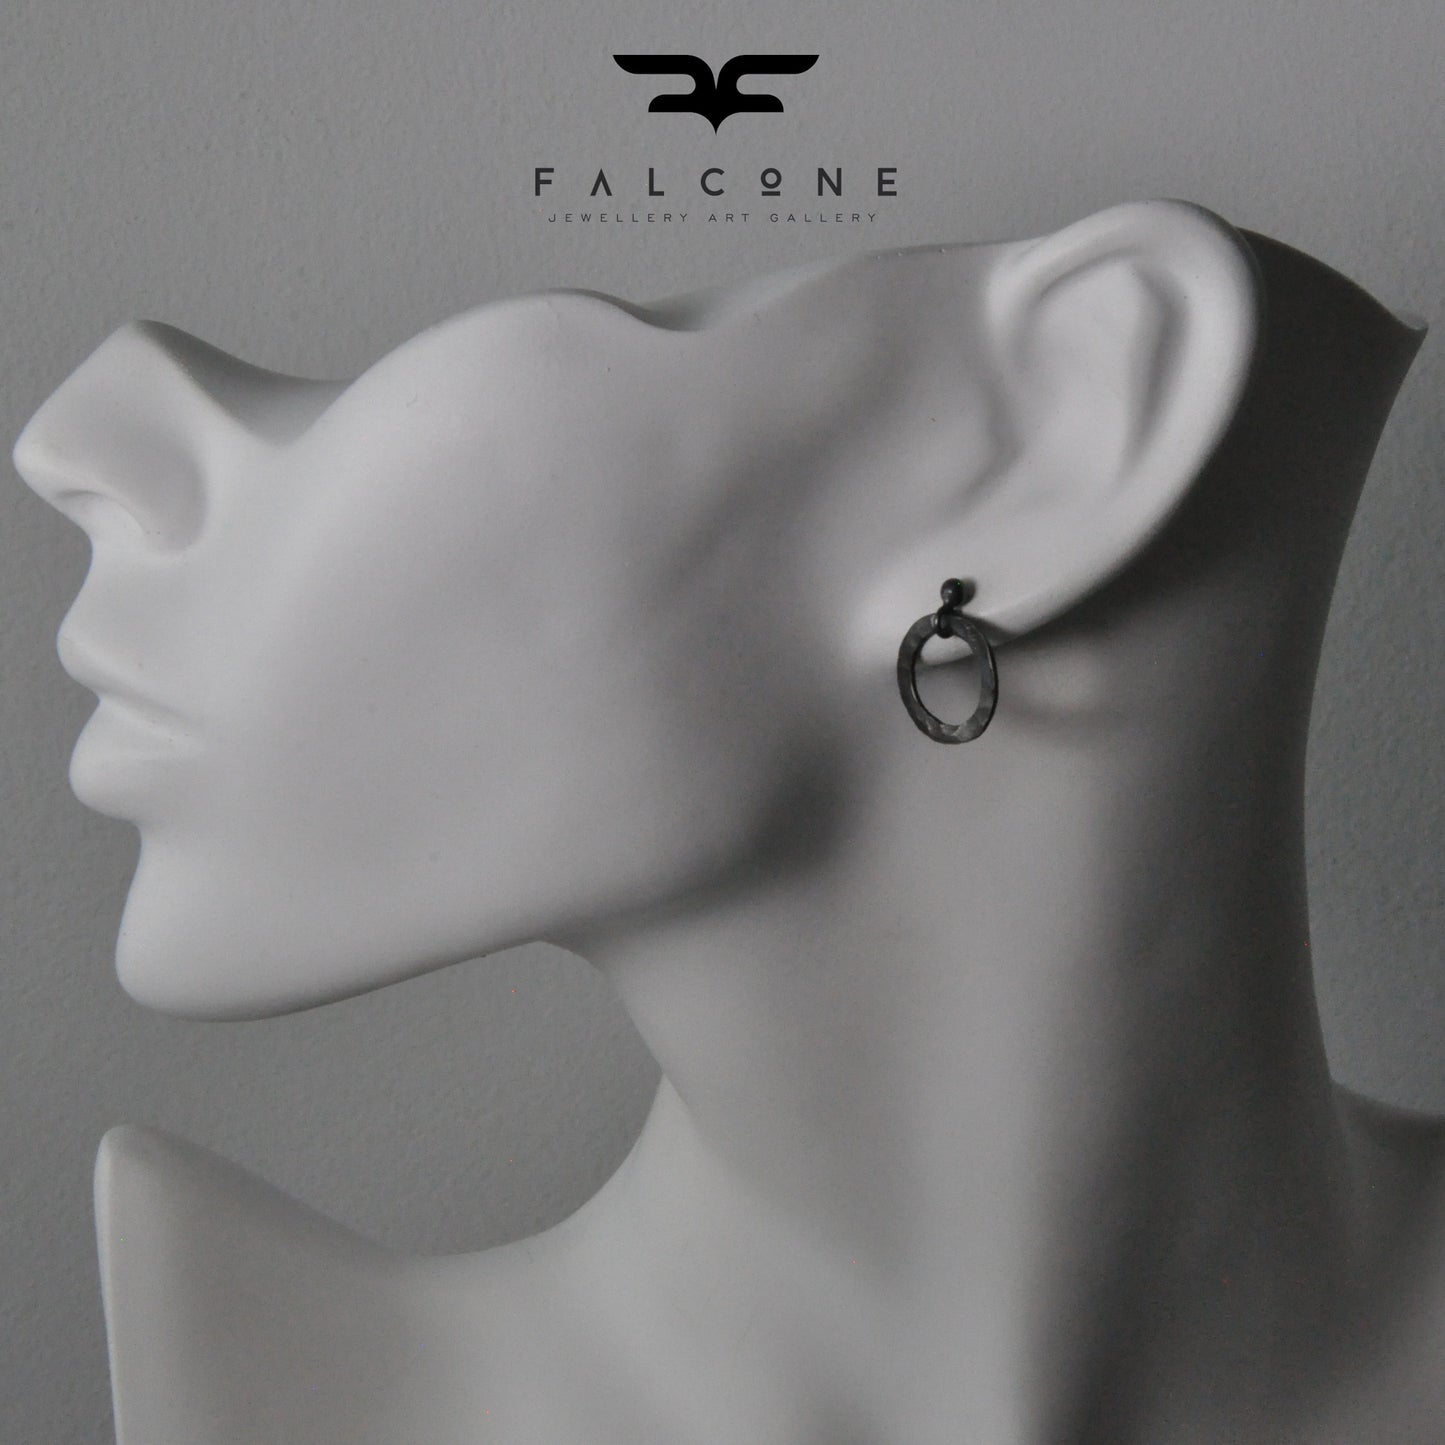 Artisanal, minimalist copper and silver 'Almost Black' earrings